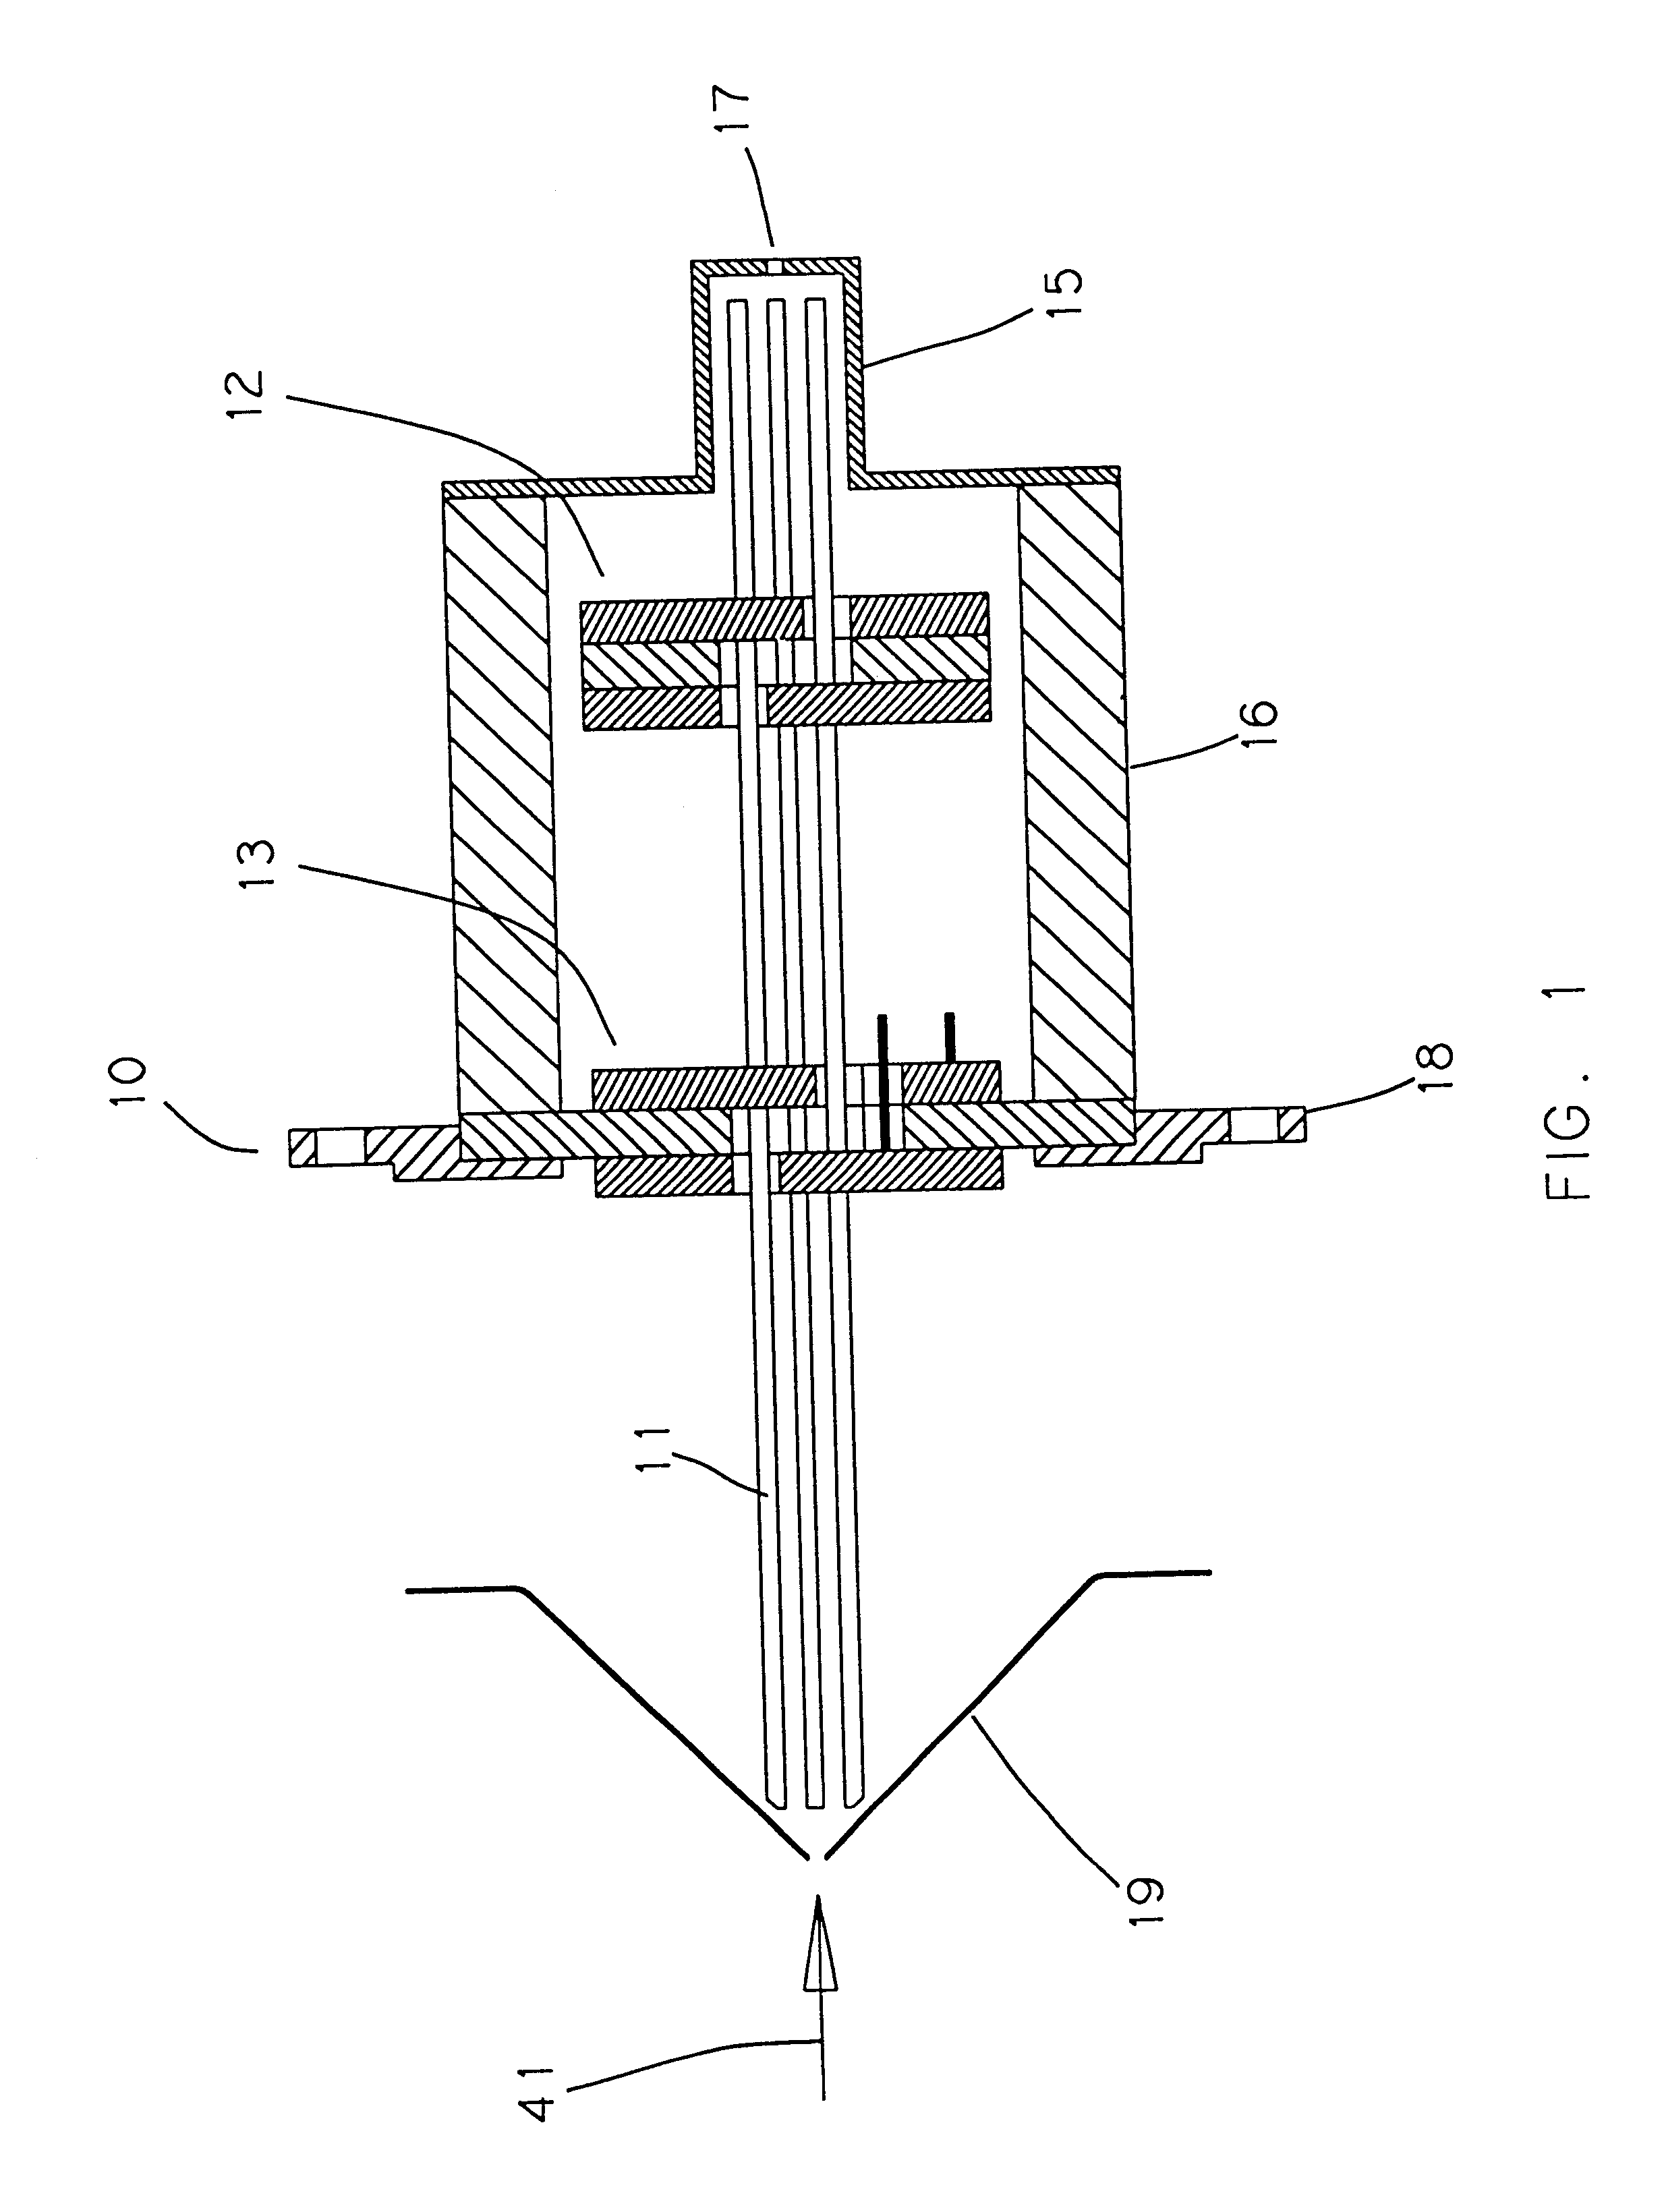 Multipole rod construction for ion guides and mass spectrometers